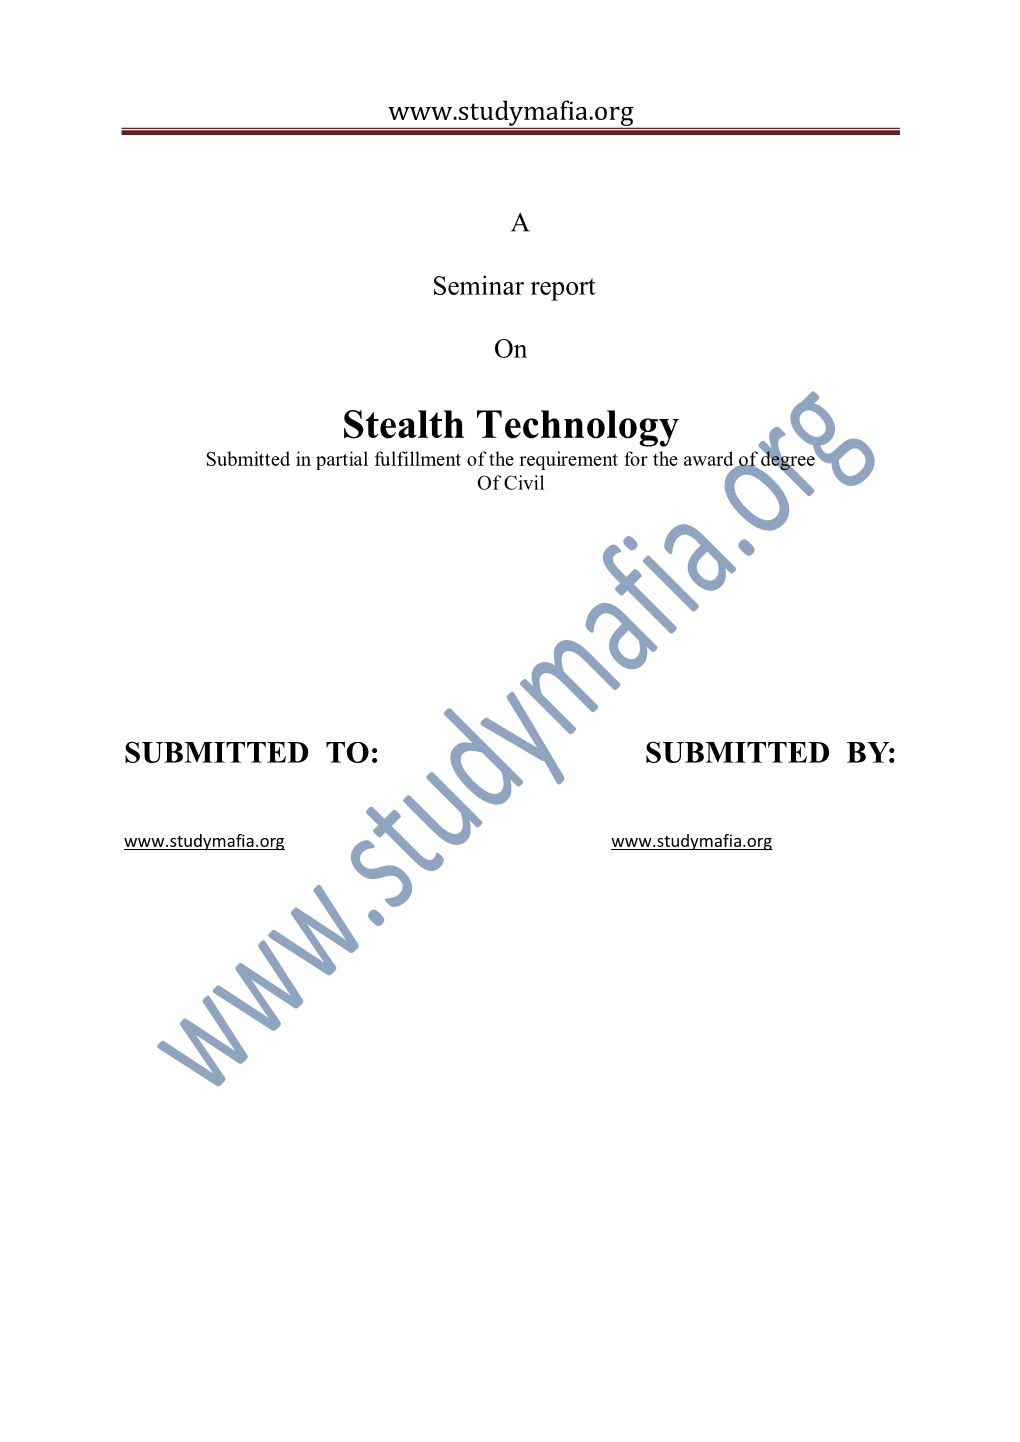 Stealth Technology Submitted in Partial Fulfillment of the Requirement for the Award of Degree of Civil